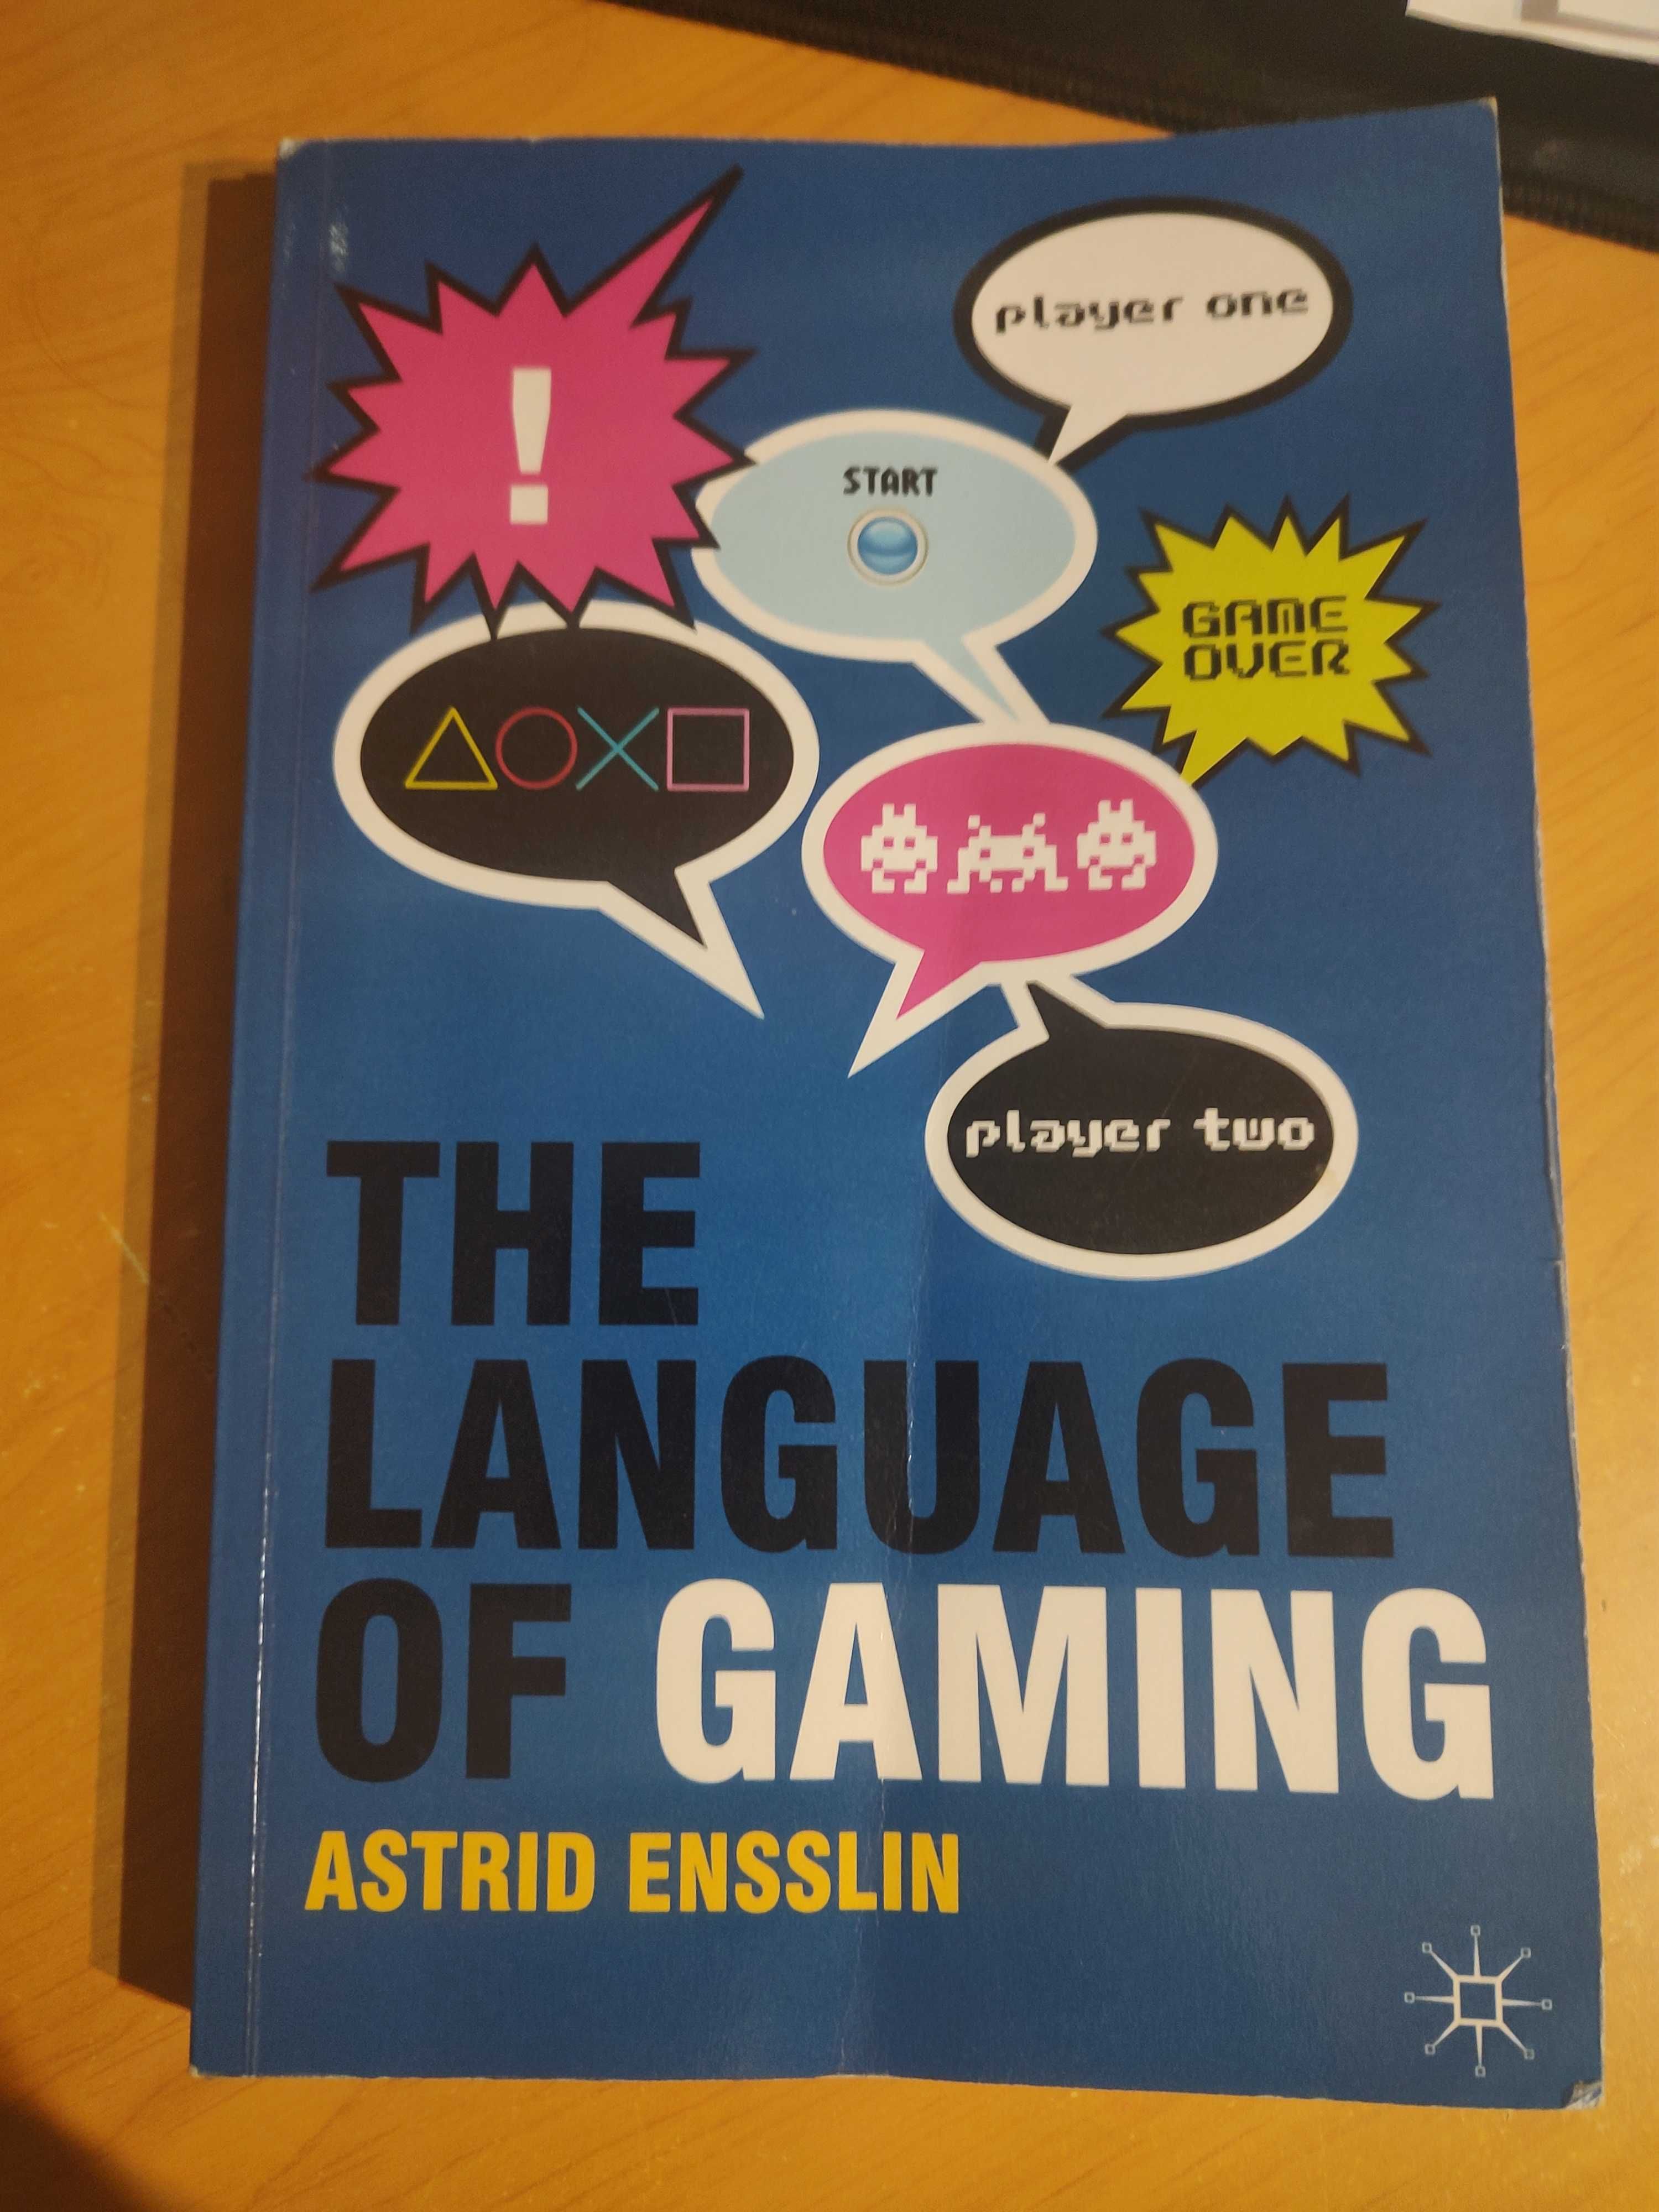 The language of gaming Astrid Ensslin